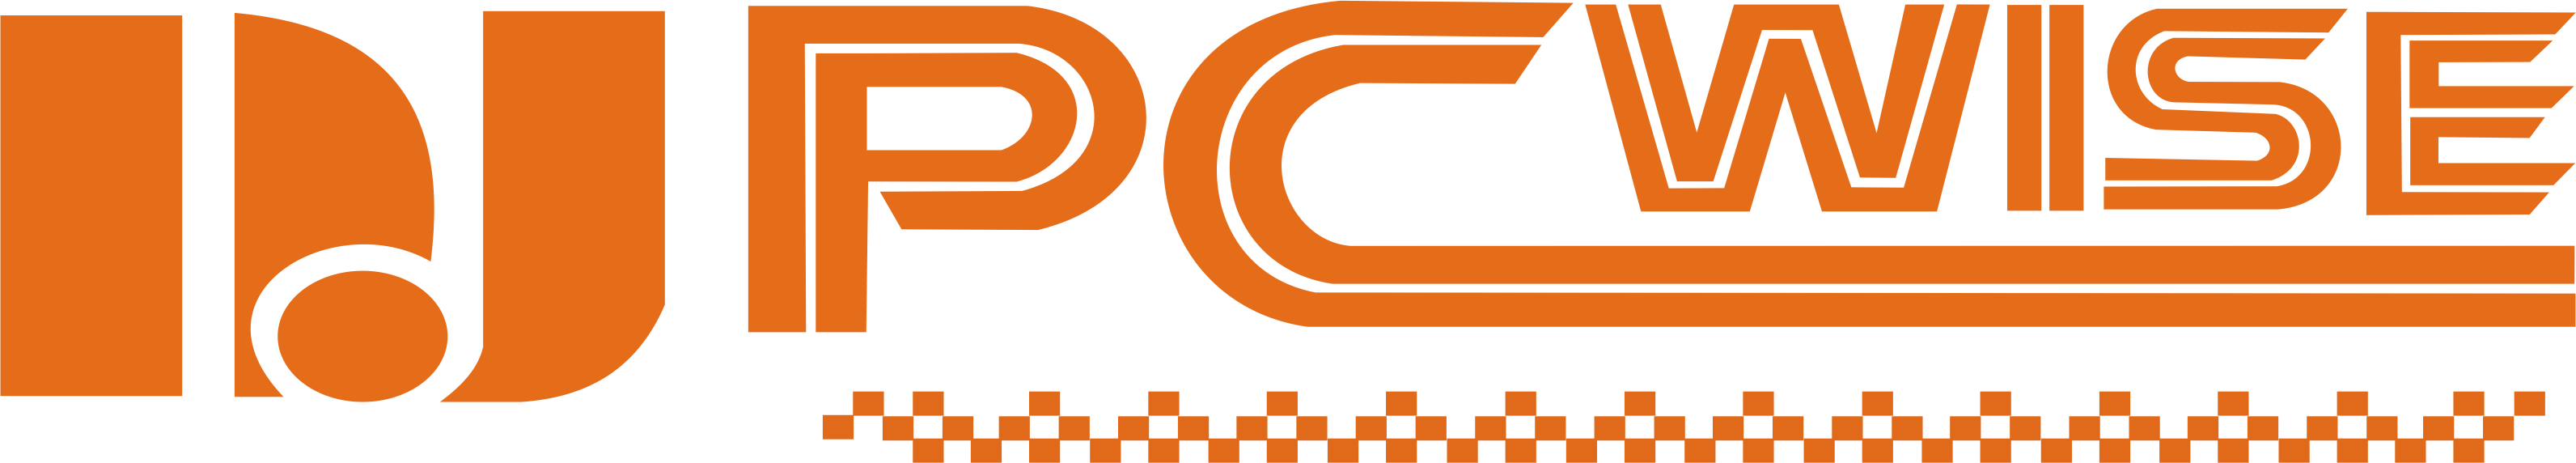 https://djpcwisecorp.com/wp-content/uploads/2022/06/cropped-Orange.png